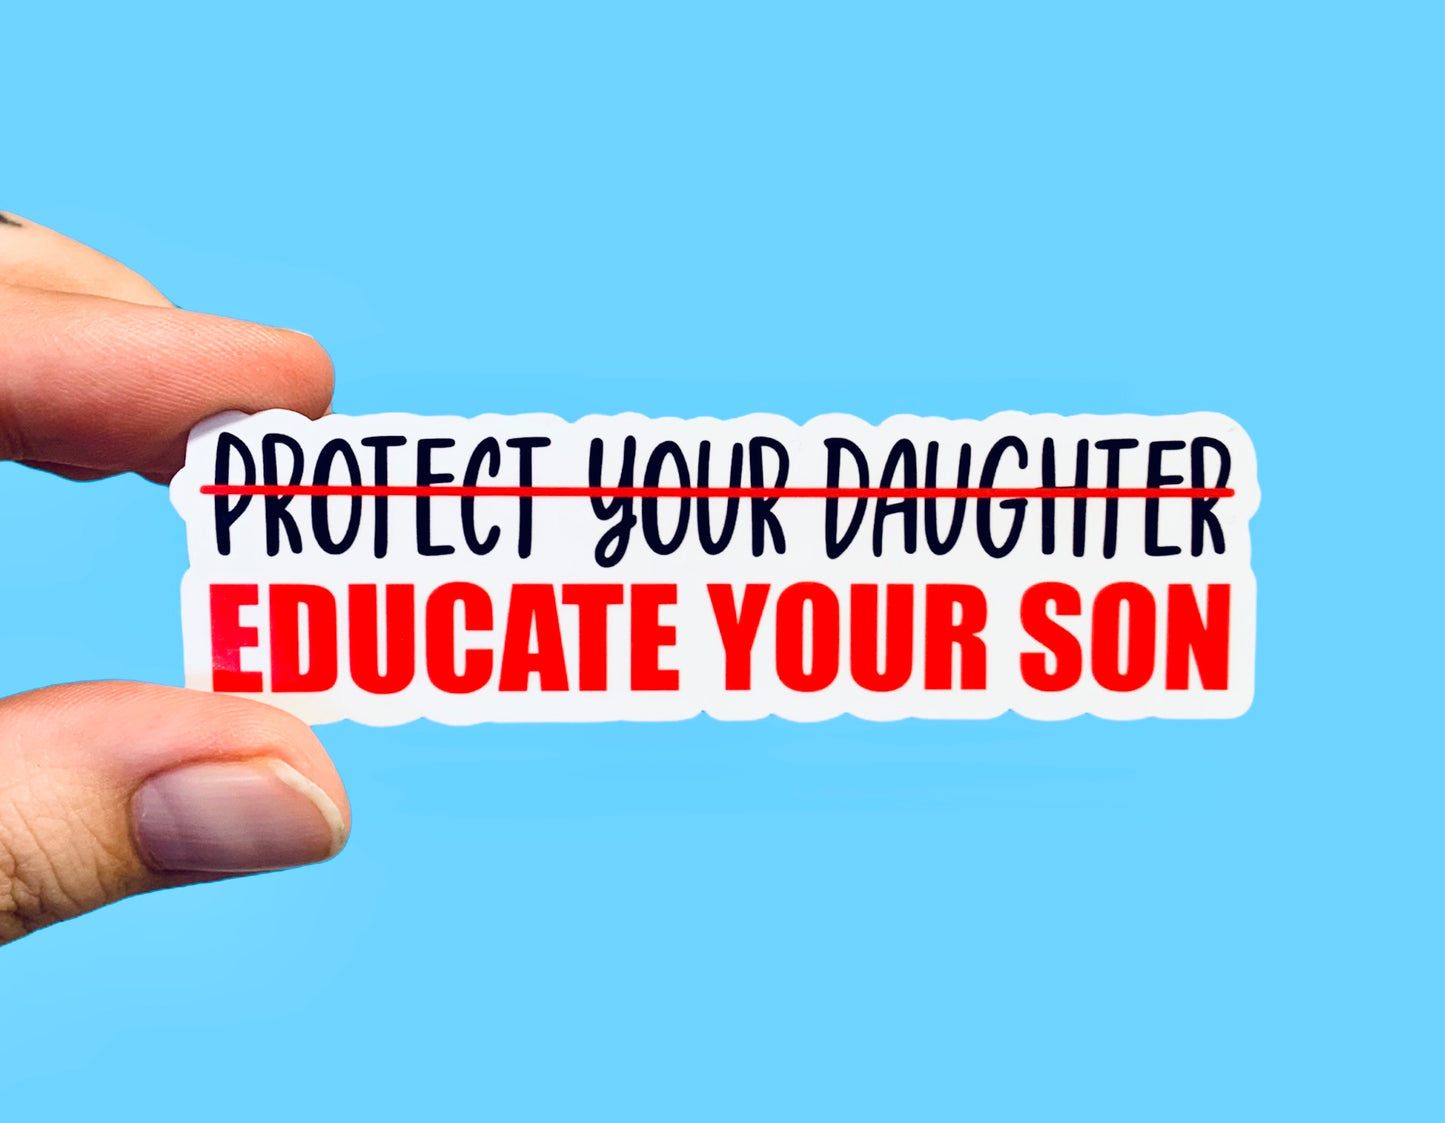 Educate your son (pack of 3 or 5 stickers)